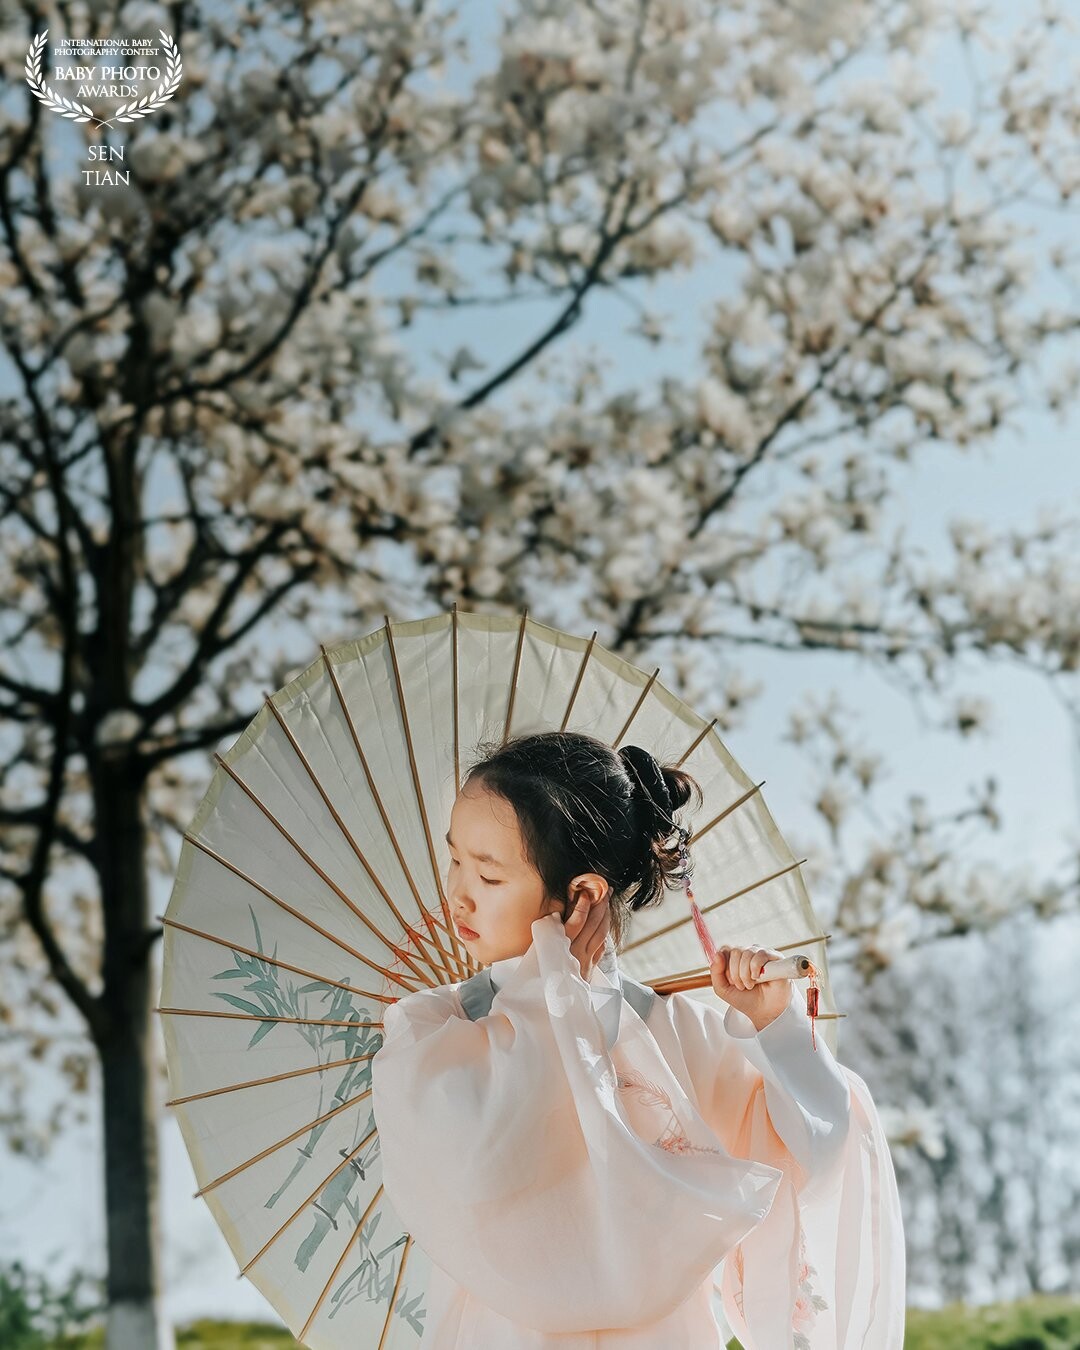 Unknowingly, it is the season of early spring. The cool wind blows, and the spirit of the tree is flying all over the sky. Standing in the backlight, Xiaosen has a transparent beauty. The air emits a charming smell that only belongs to her, and she is unconsciously intoxicated in it.